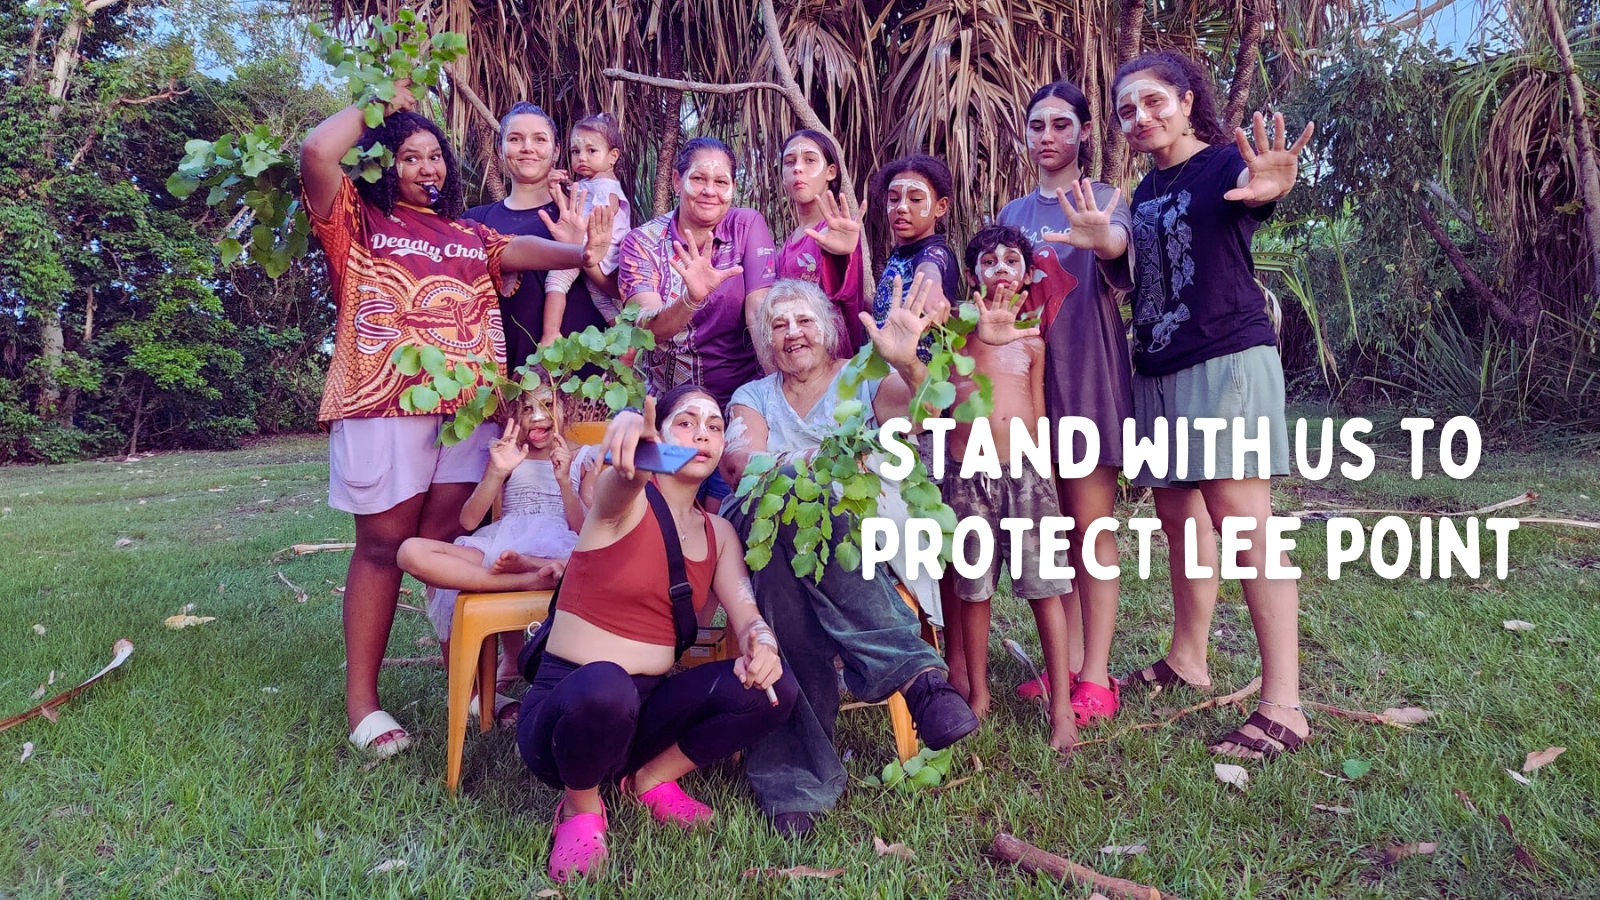 A group of Larrakia women and children pose, painted up, in front of lush greenery. Overlaid on the photo is the text "stand with us to save Lee Point."